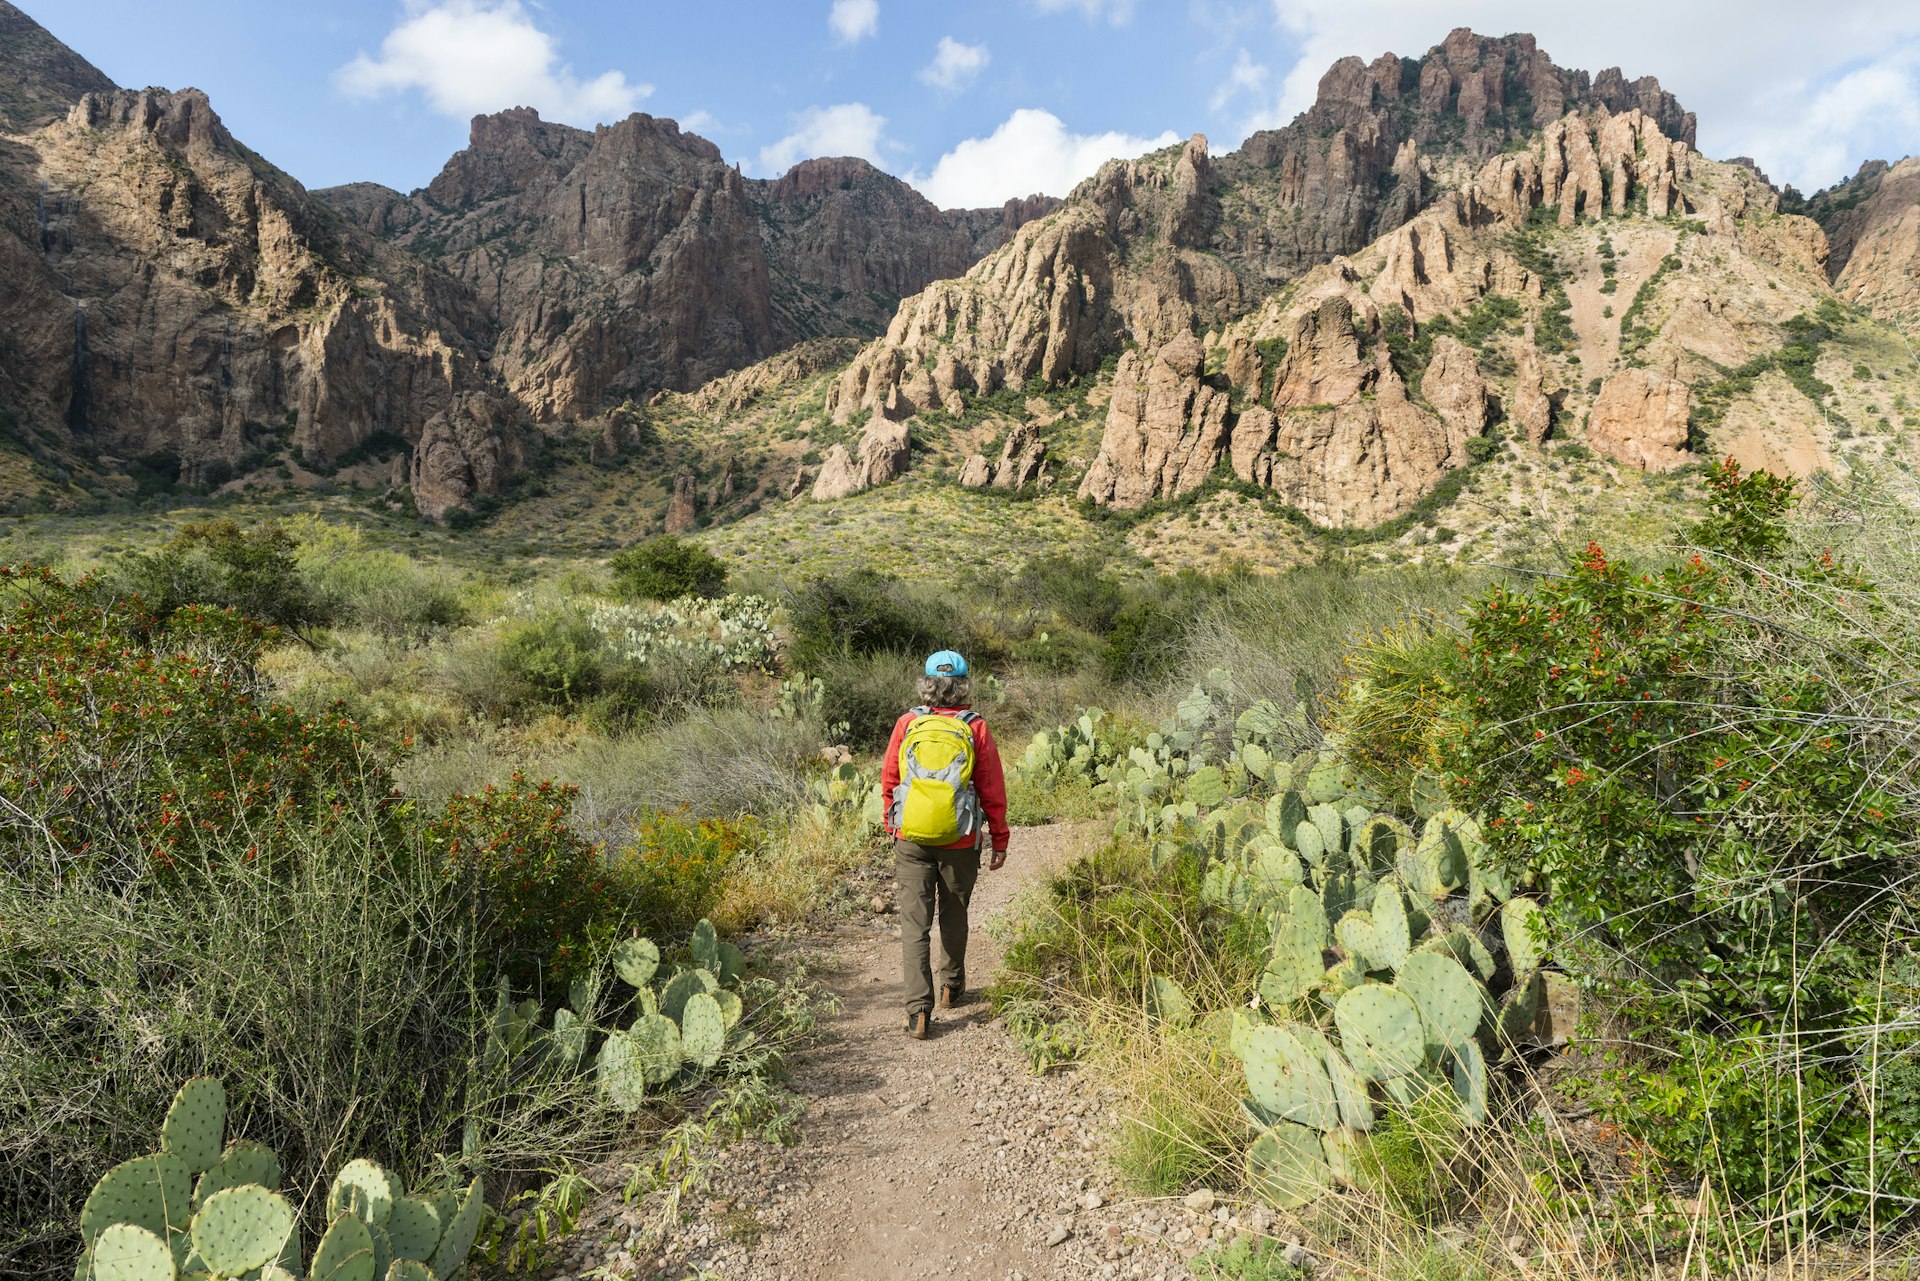 Senior woman walking on trail trough cactus, yucca plant and rocks in Big Bend National Park, Texas, USA. 